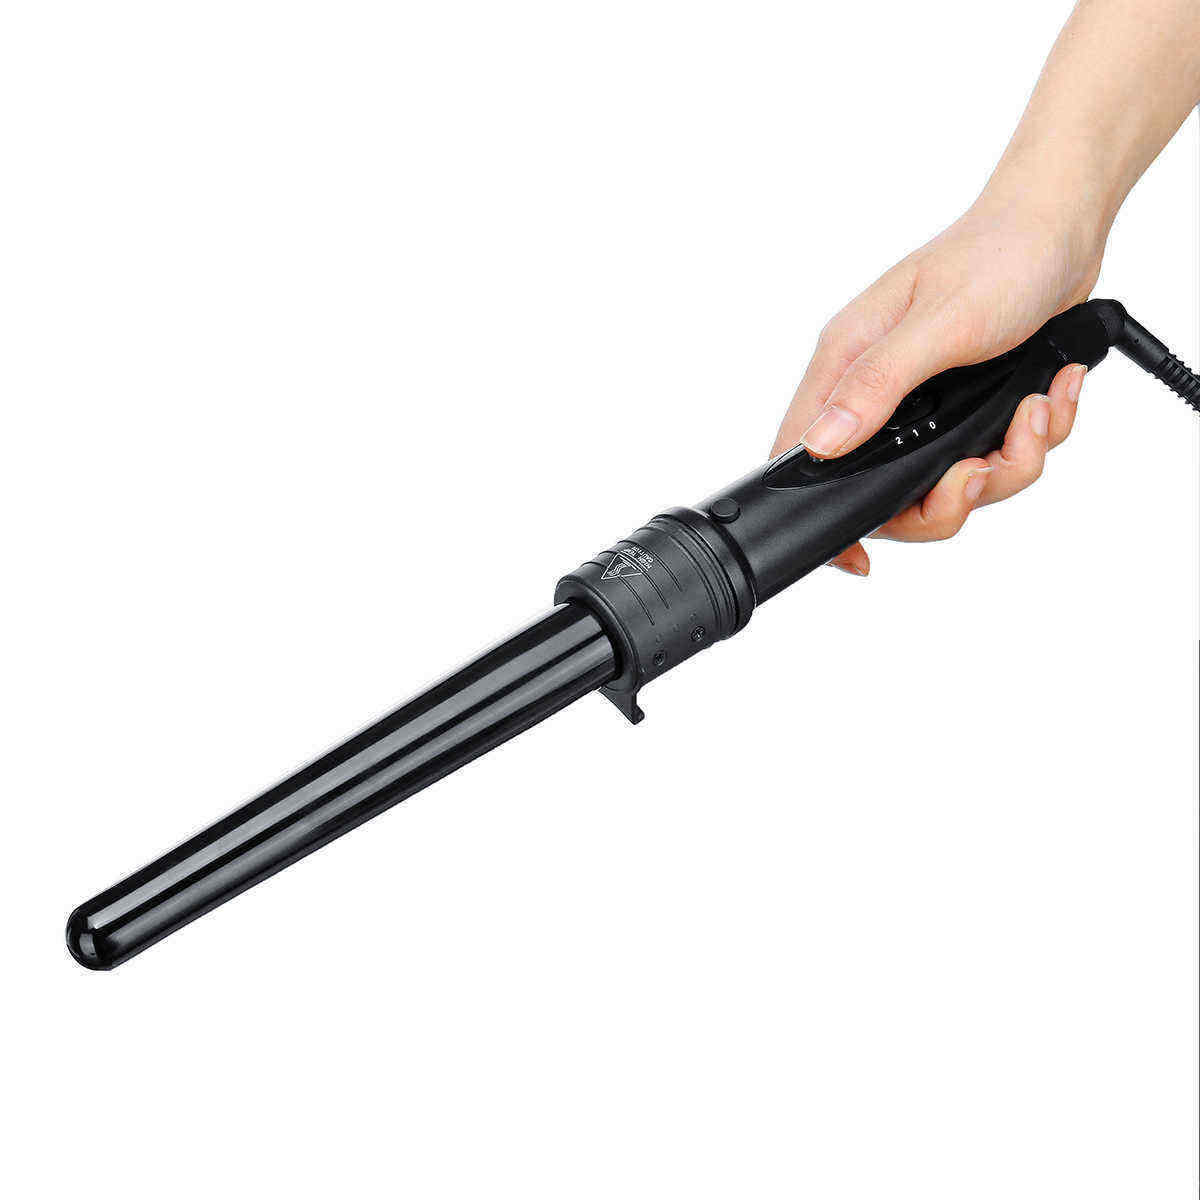 100-240V-85W-9-32mm-Ceramic-Hair-Curling-Wand-Salon-Curler-Tong-Styler-Straighter-Comb-Roller-1446706